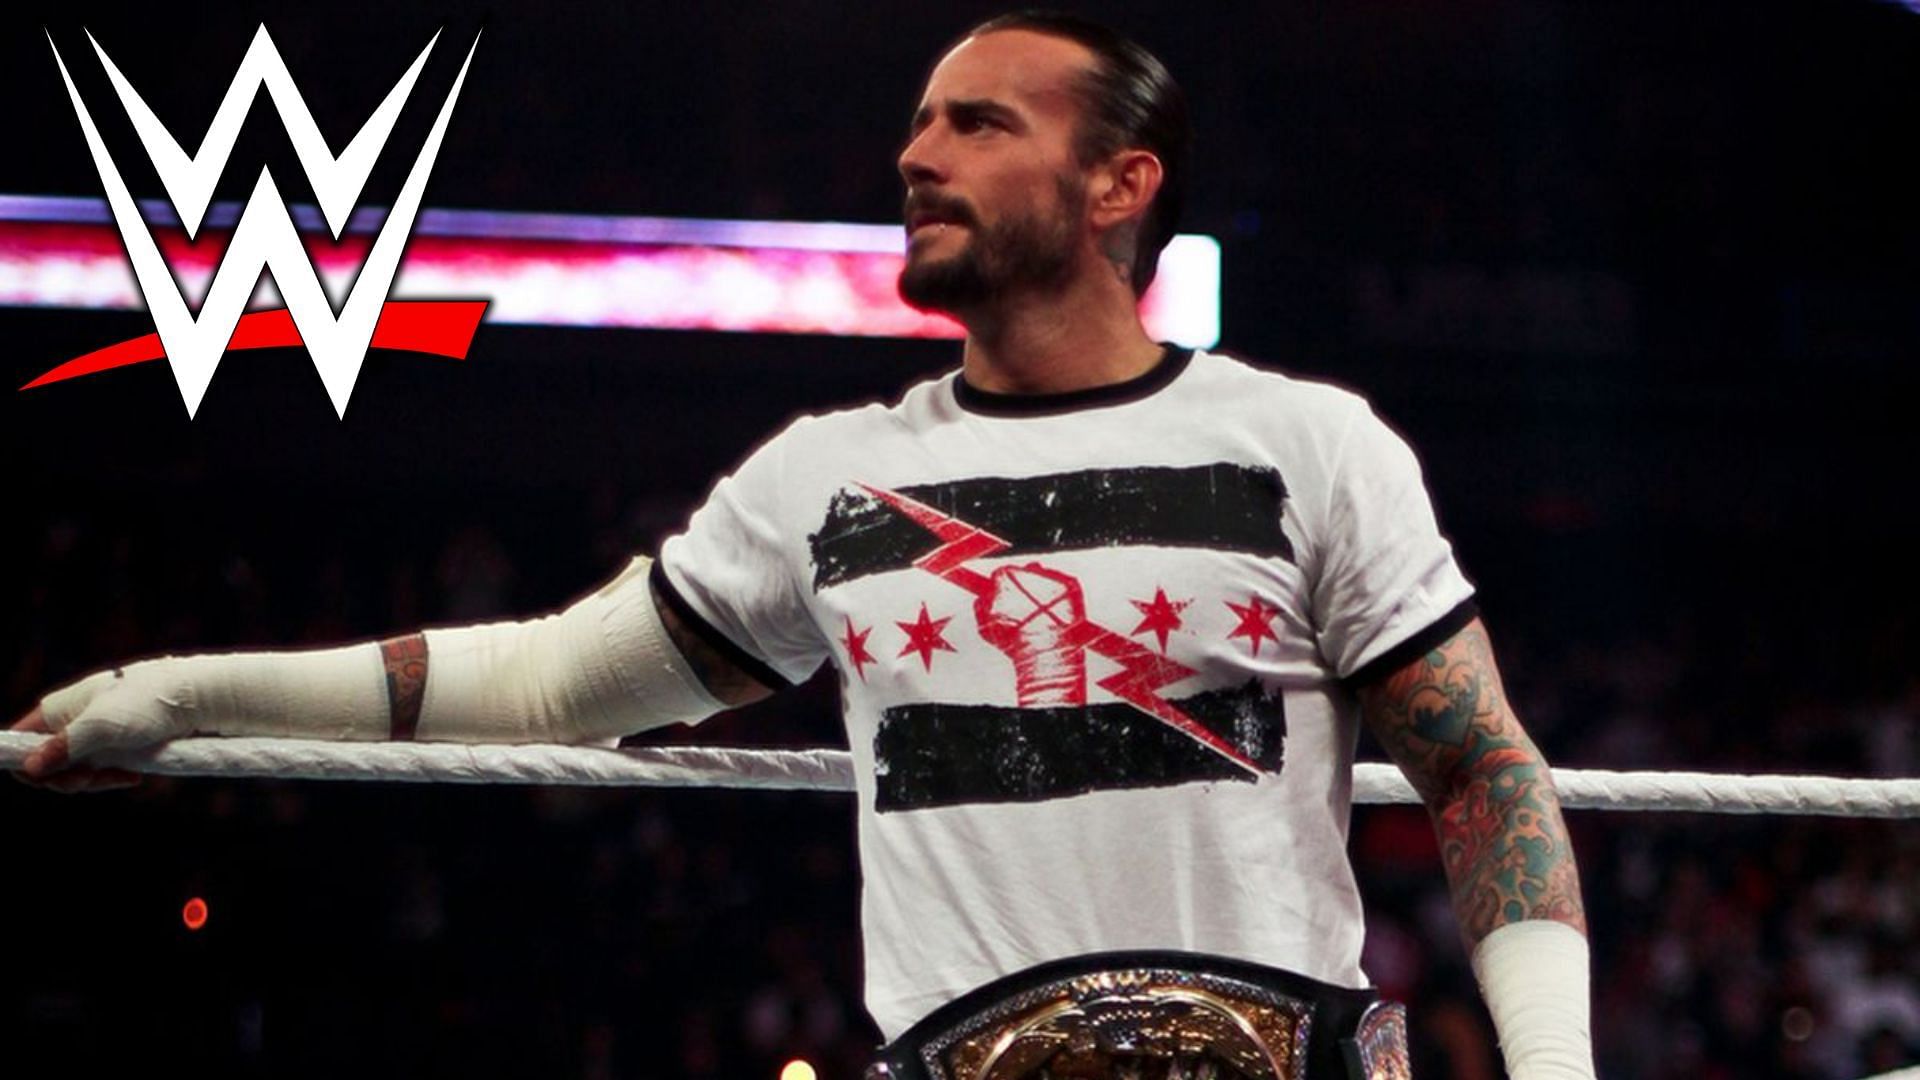 CM Punk during his tenure with WWE as the World Champion.